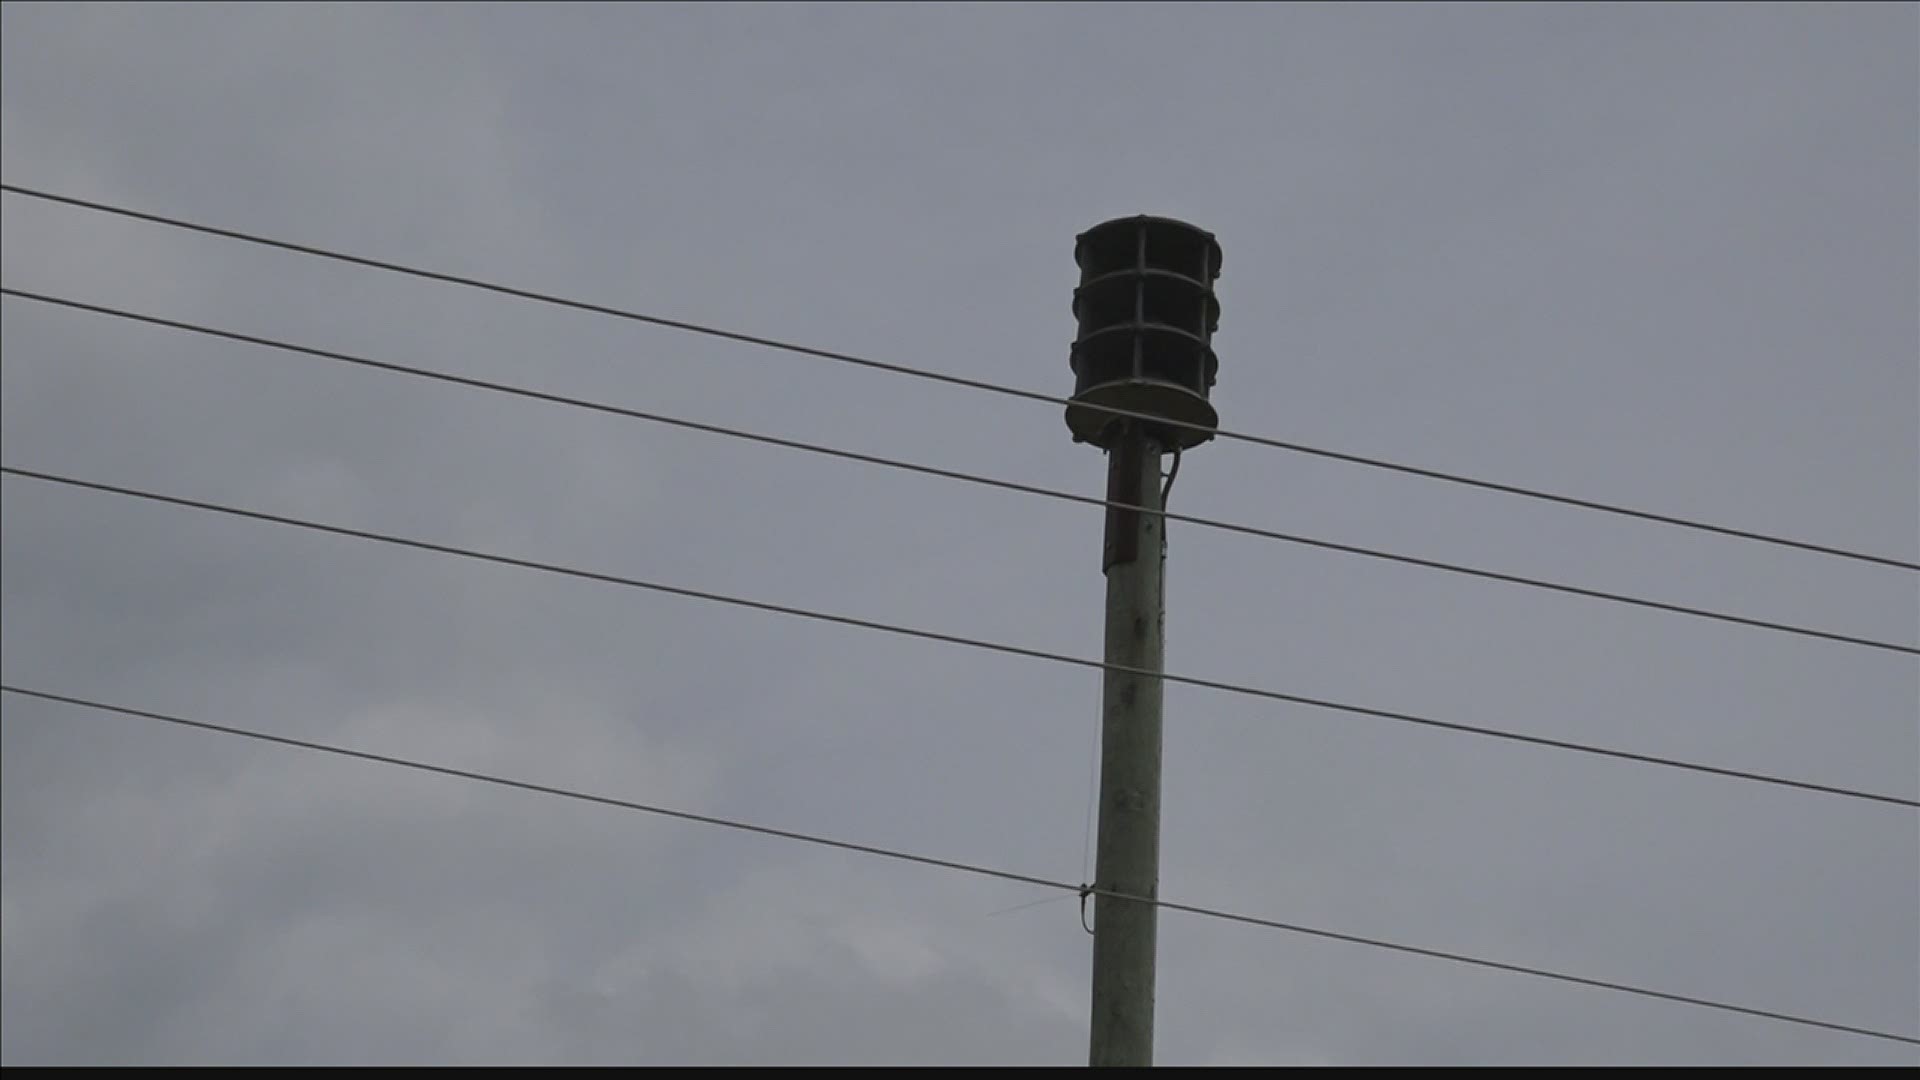 The city said the cost of having a contractor repair and maintain the sirens outweighed the benefits of keeping them.